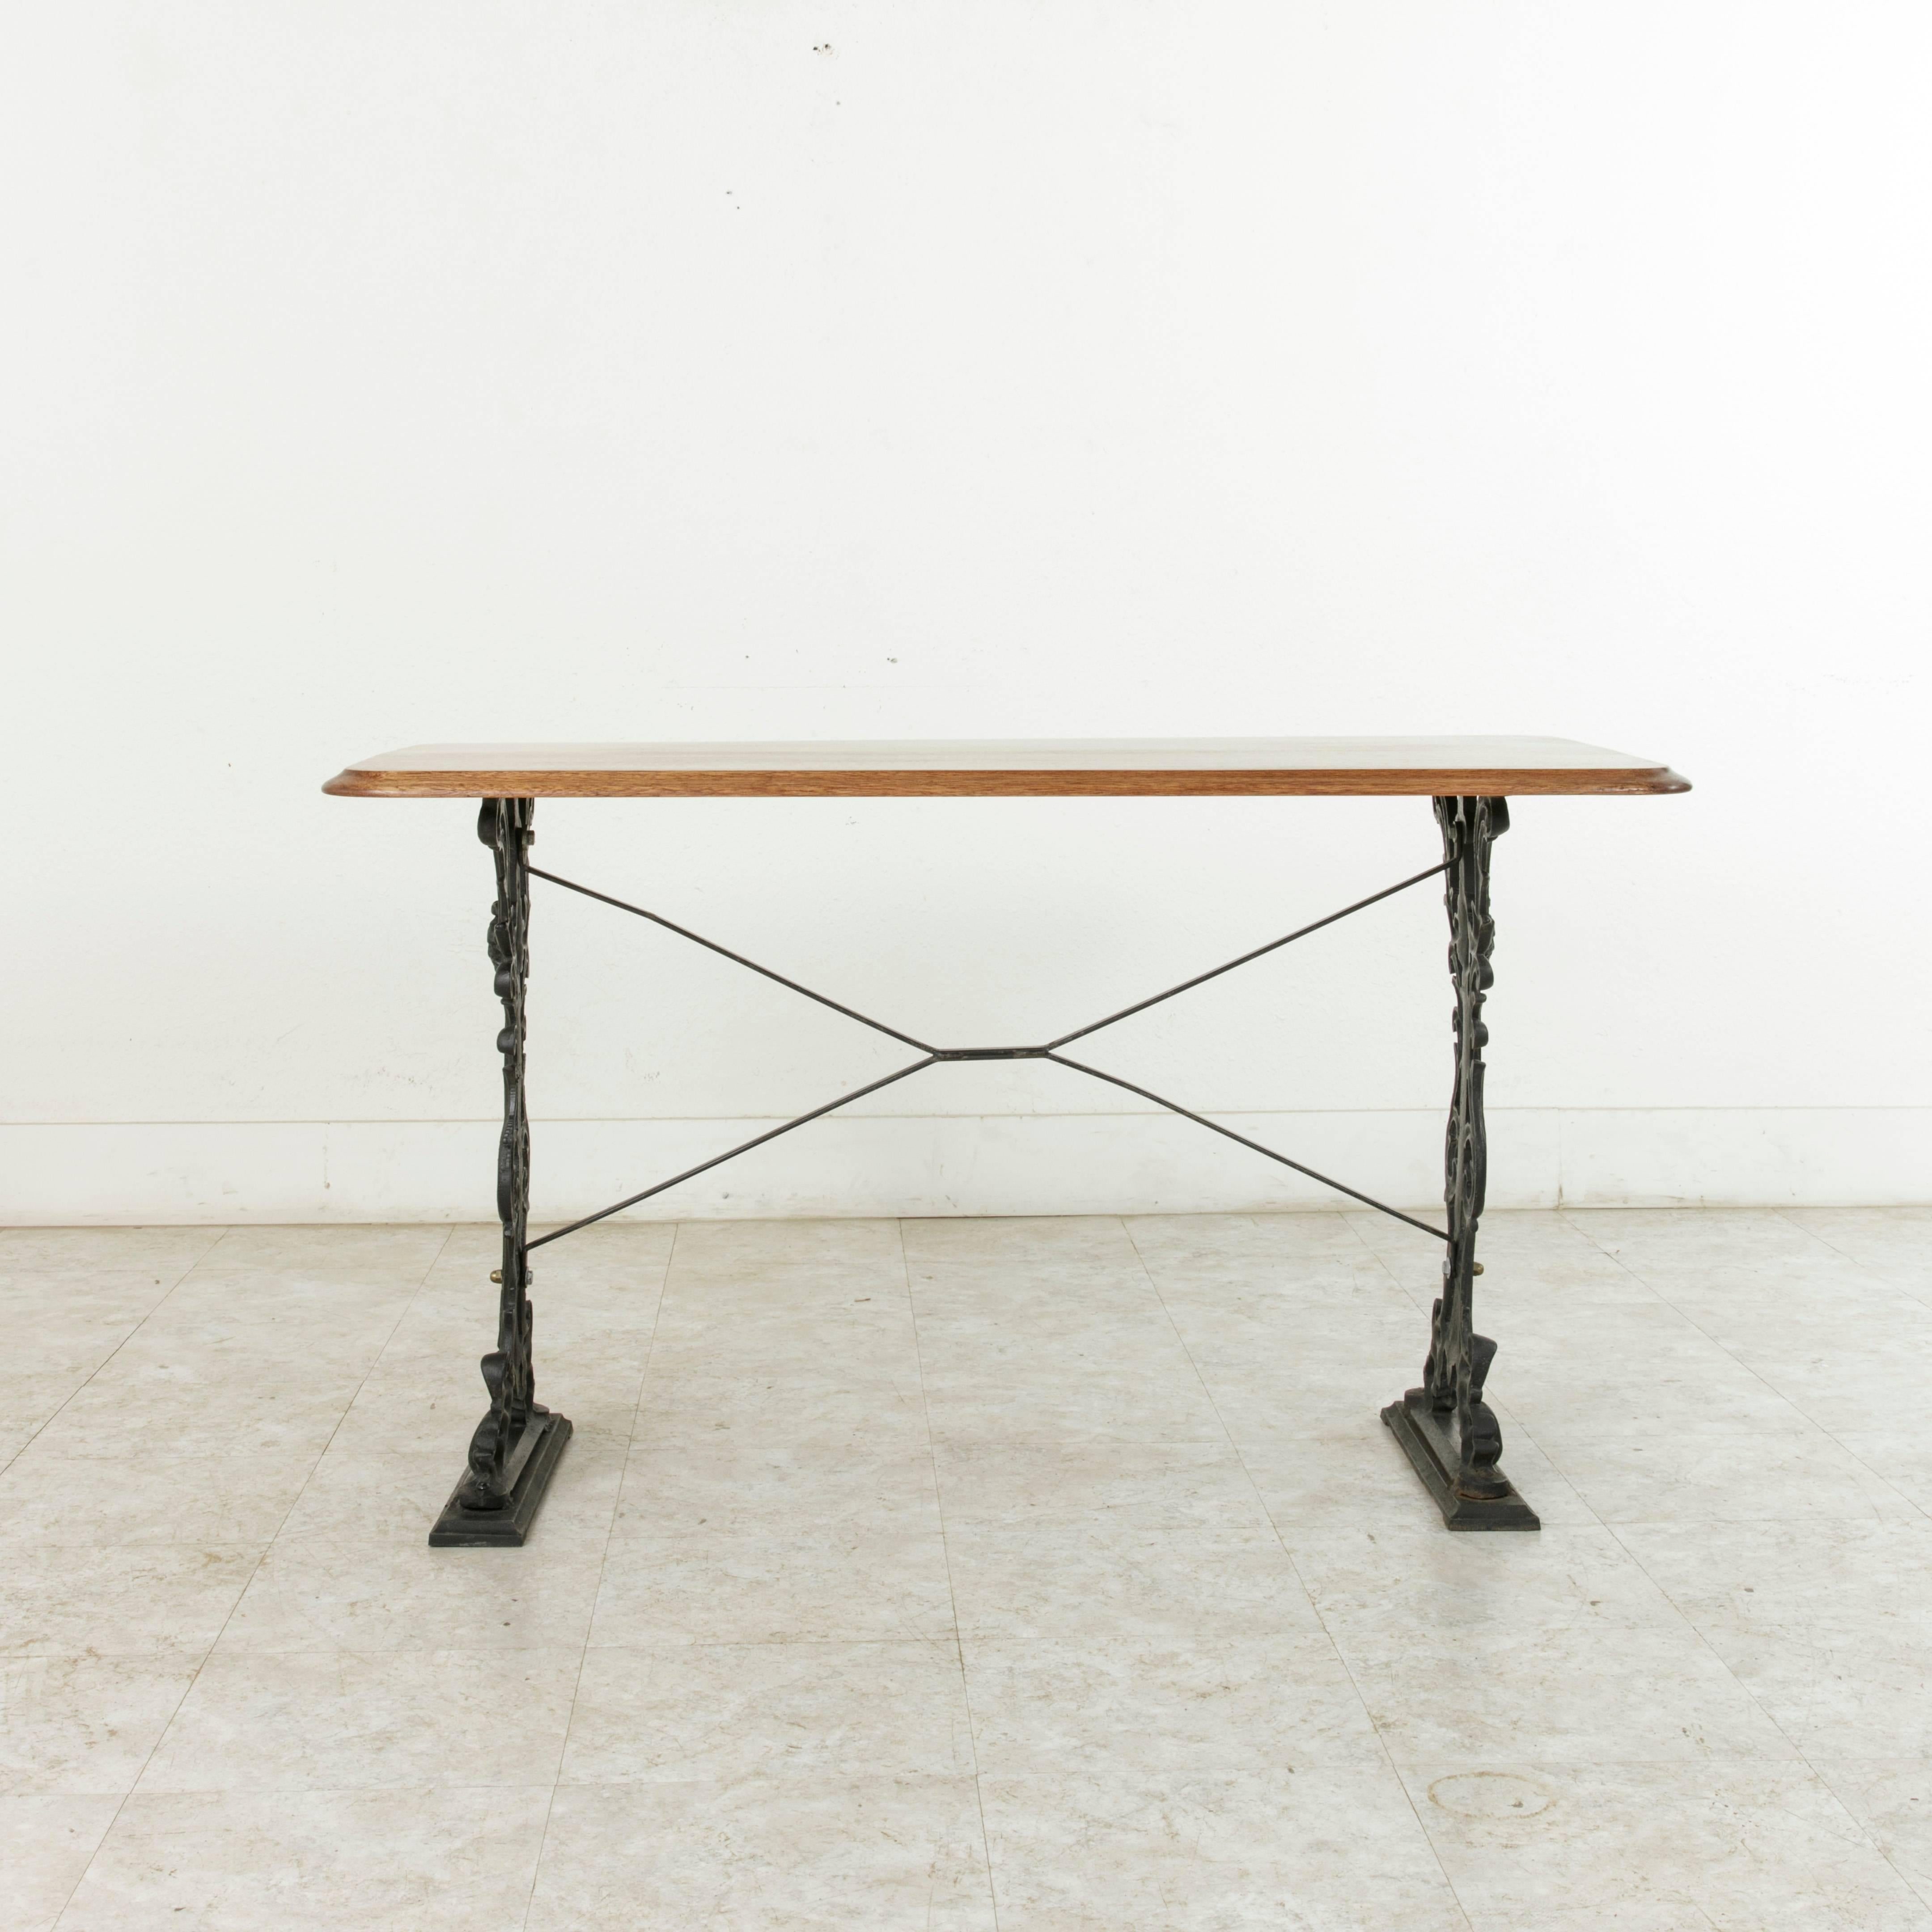 Early 20th Century French Paris Cast Iron Bistro Table or Writing Desk with Mahogany Top circa 1900